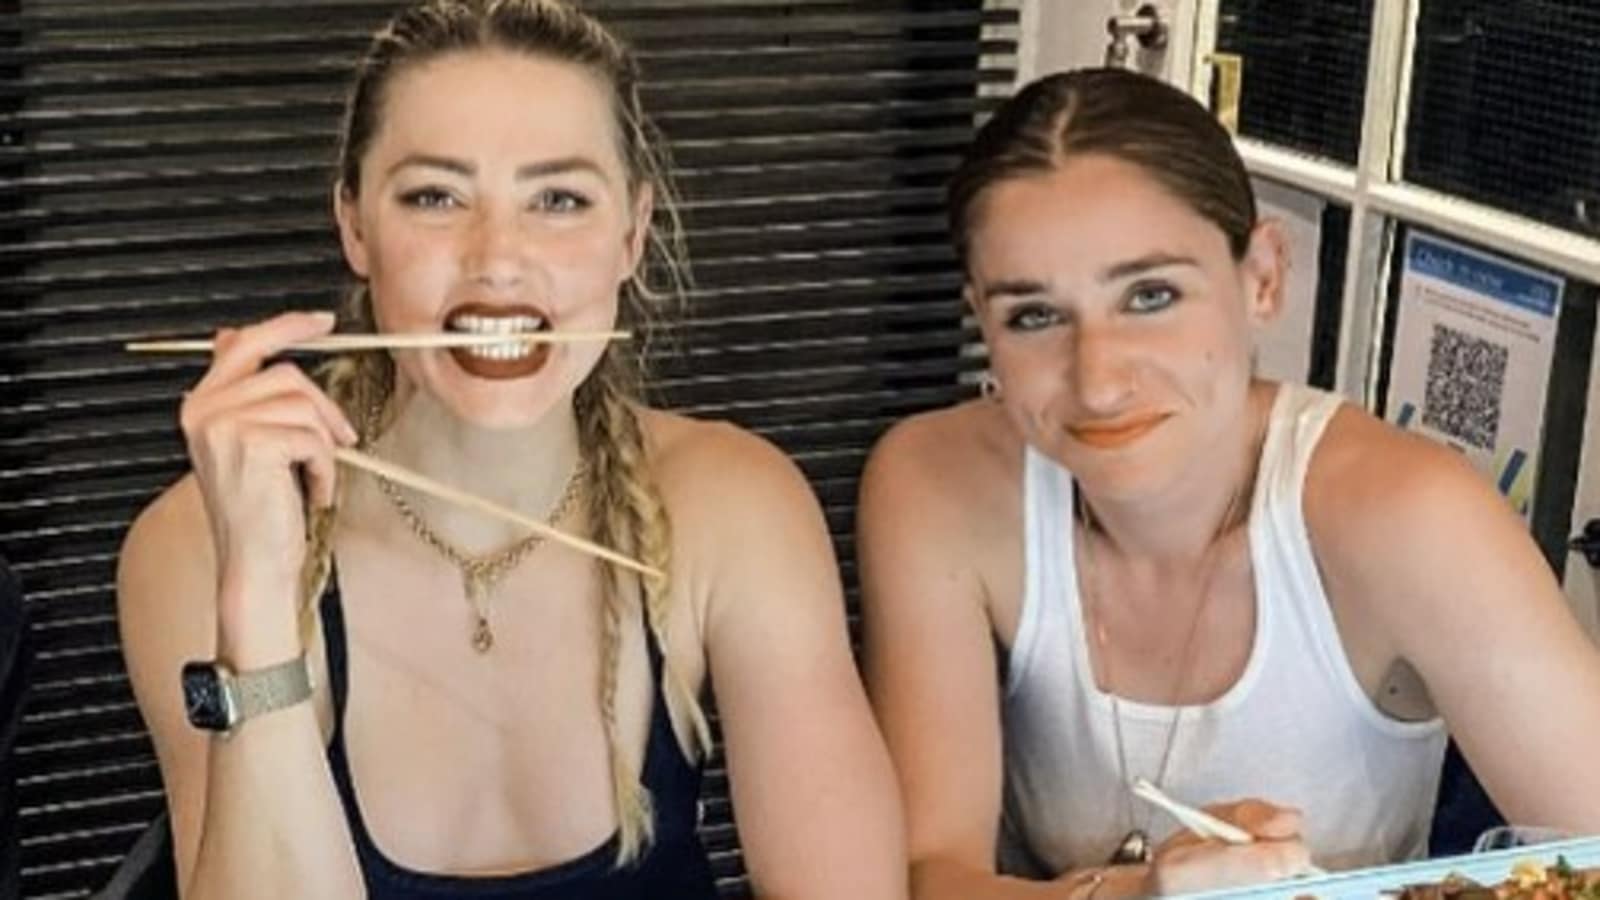 Amber Heard holidays in Israel with journalist pal who was barred from Johnny Depp trial. See pics